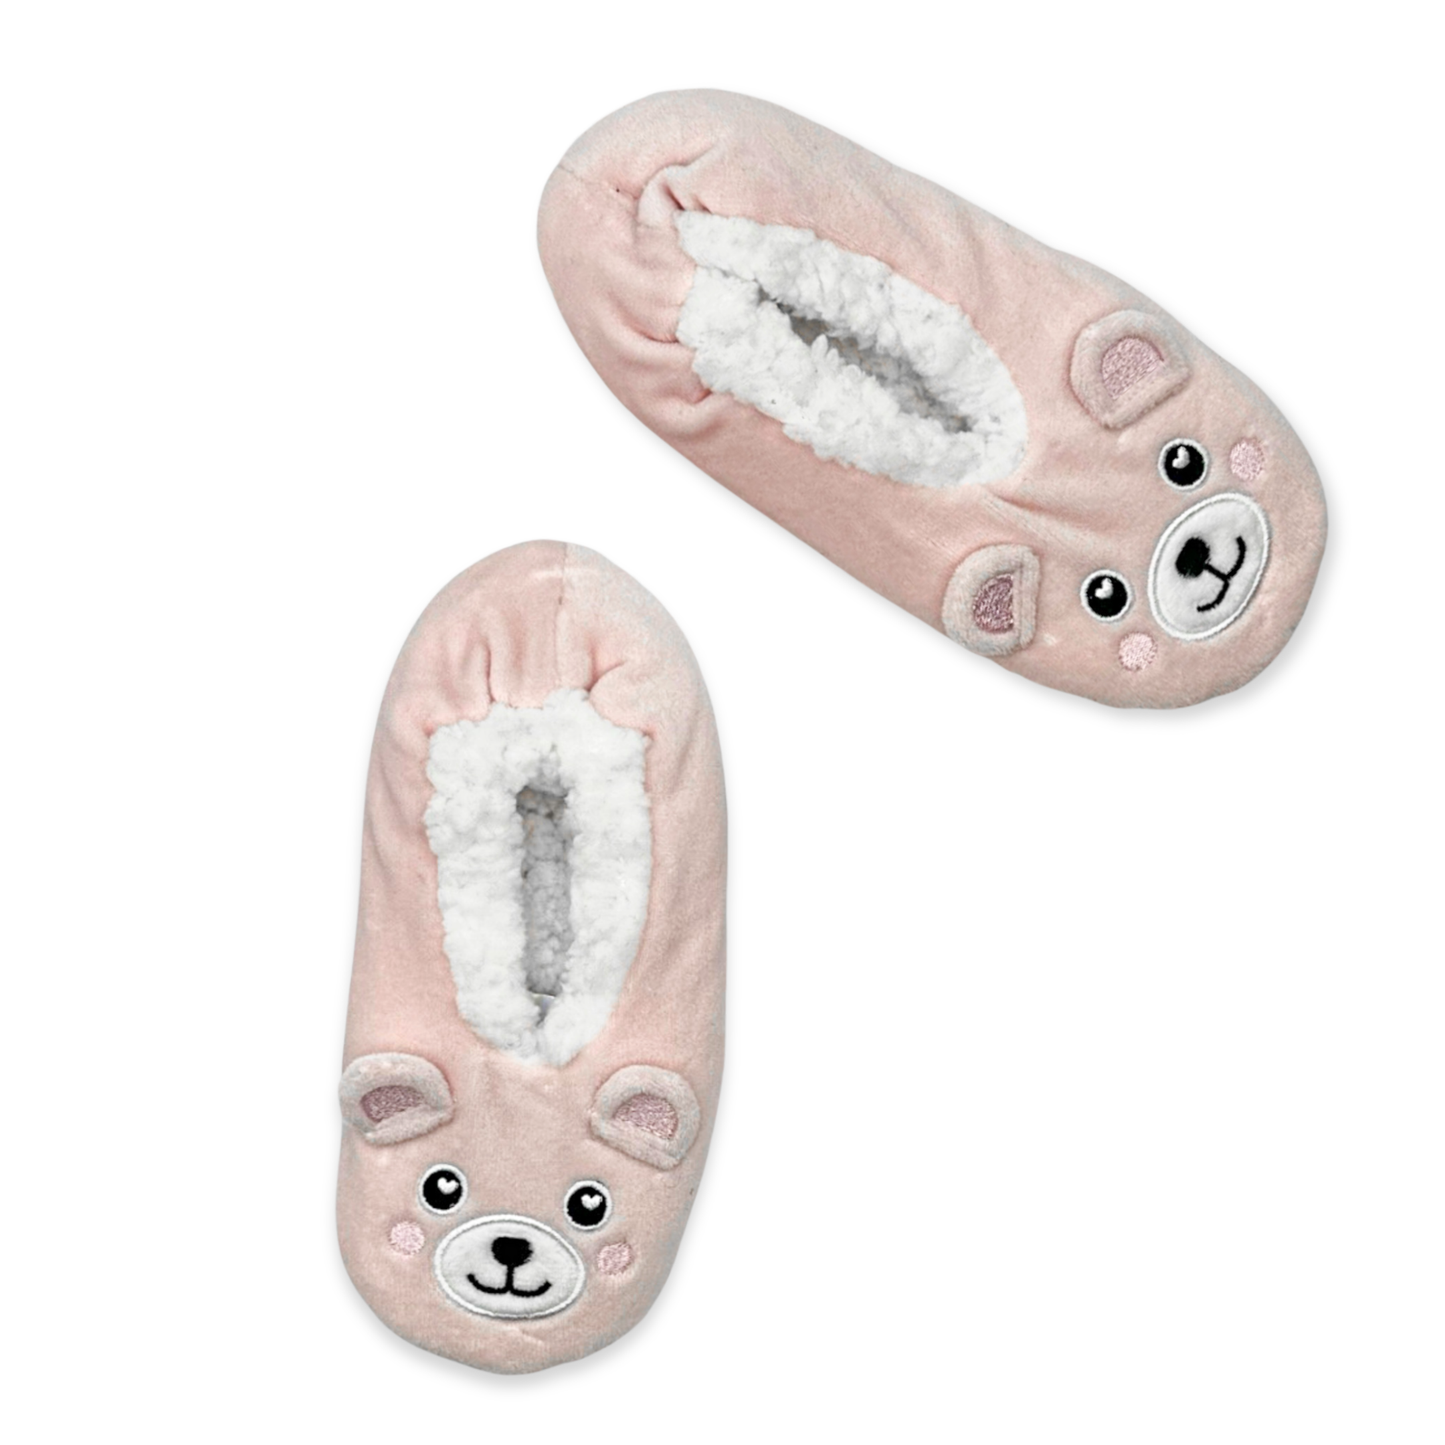 Pink slippers with teddy bear design